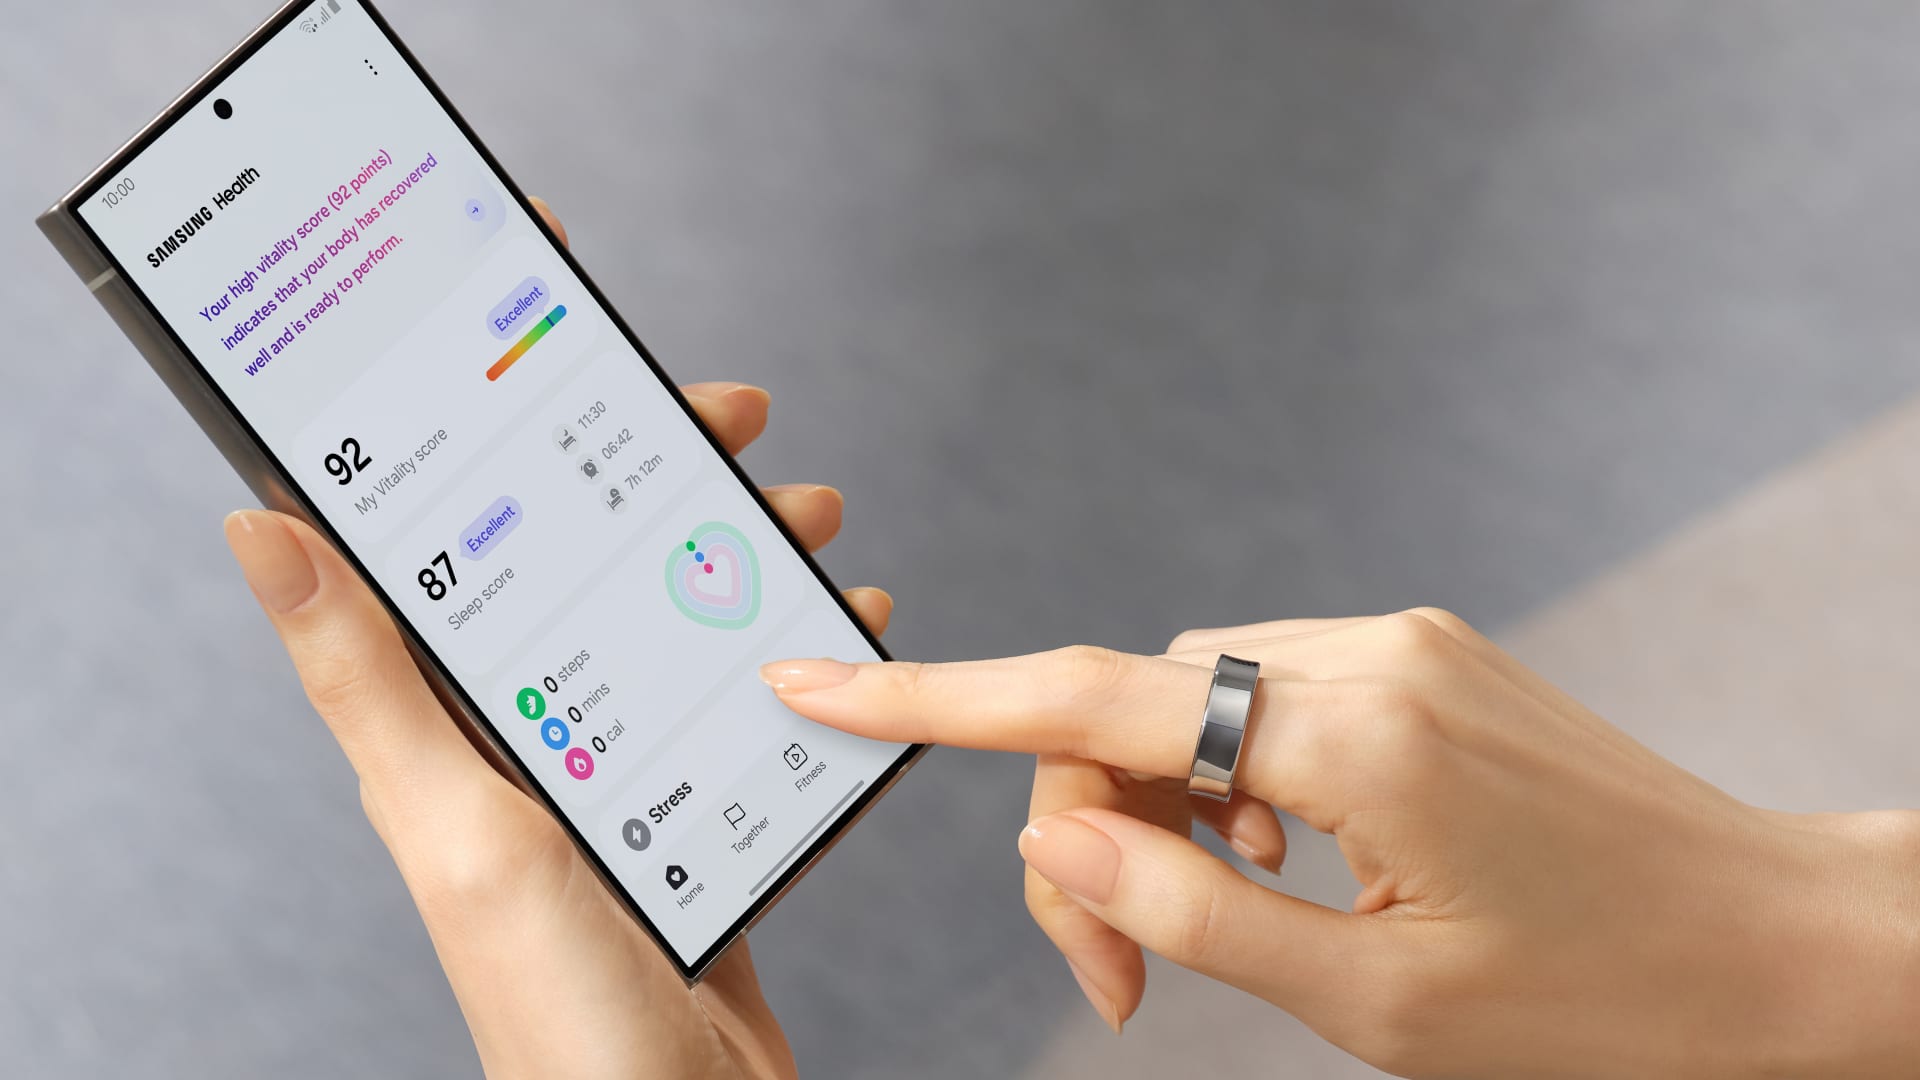 The Samsung Galaxy Ring has various sensors to track things like heart rate.